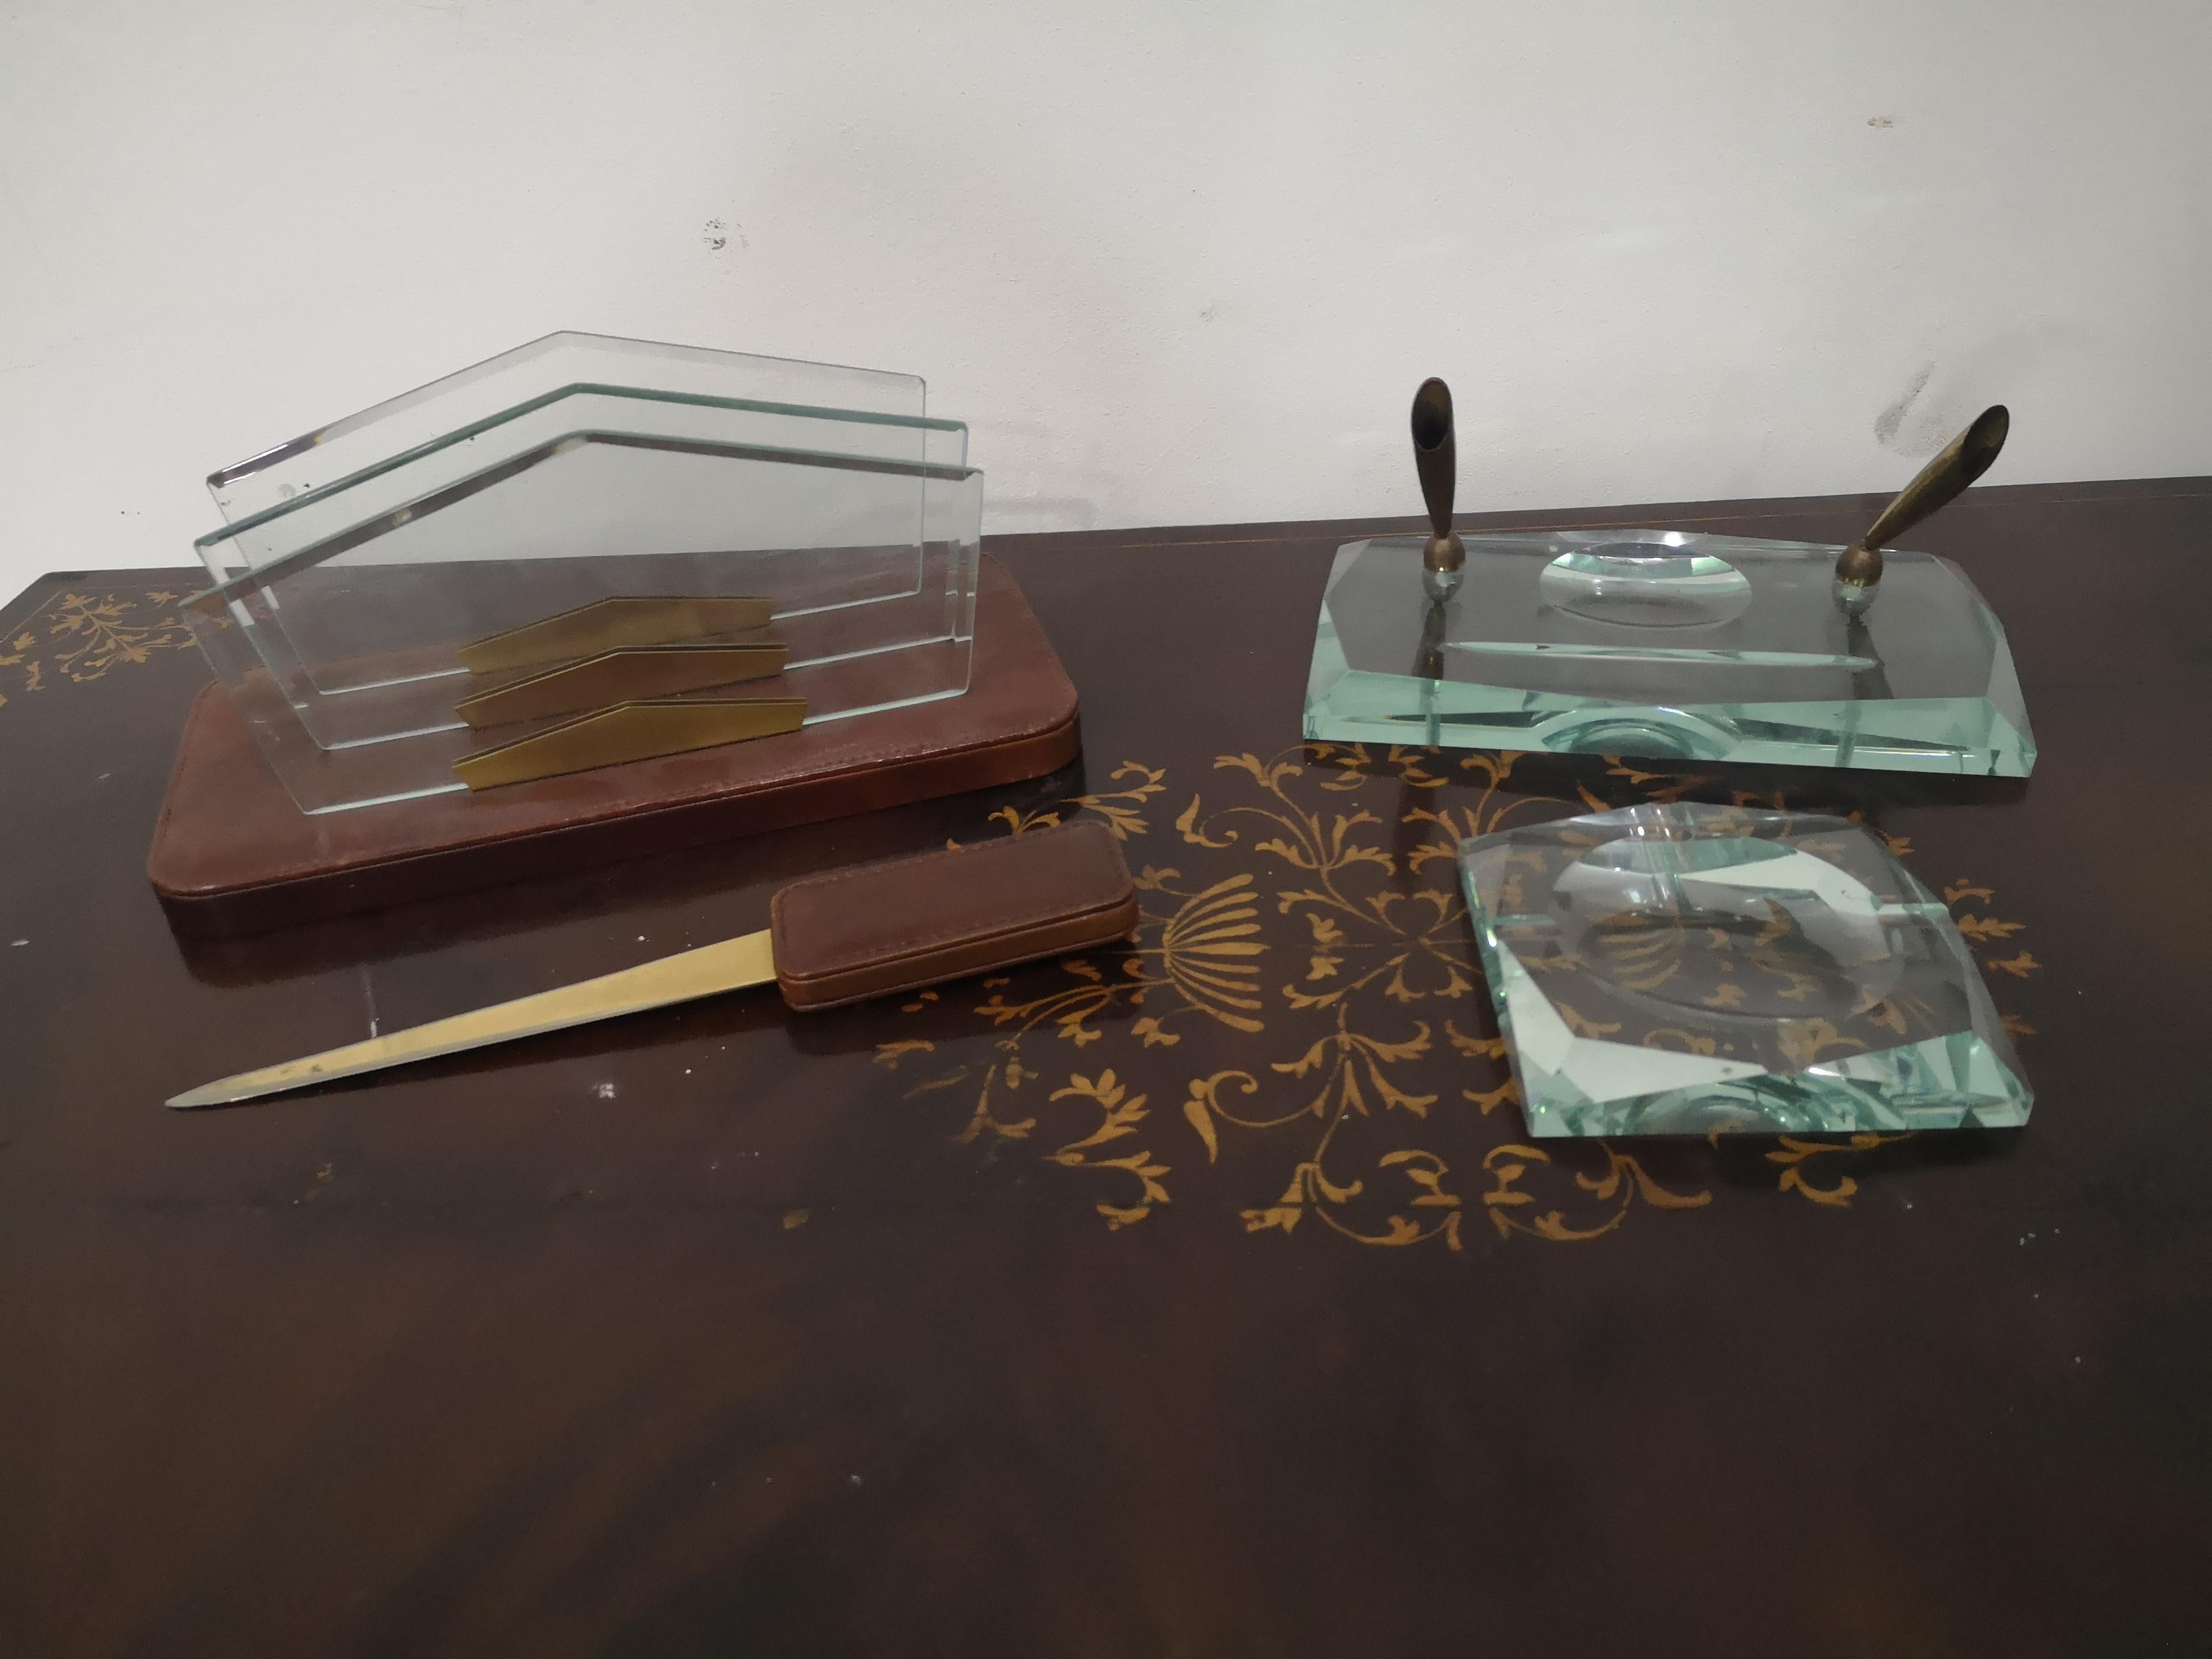 Vintage 70s Desk Set Attributed to Fontana Arte
consisting of:
Glass and brass pen holder measures 22 x 13 cm
Correspondence holder in leather and glass 28 x 14 cm
Glass ashtray cm 11.5 x 11.5
Leather and brass letter opener 26 cm - (handle width 4